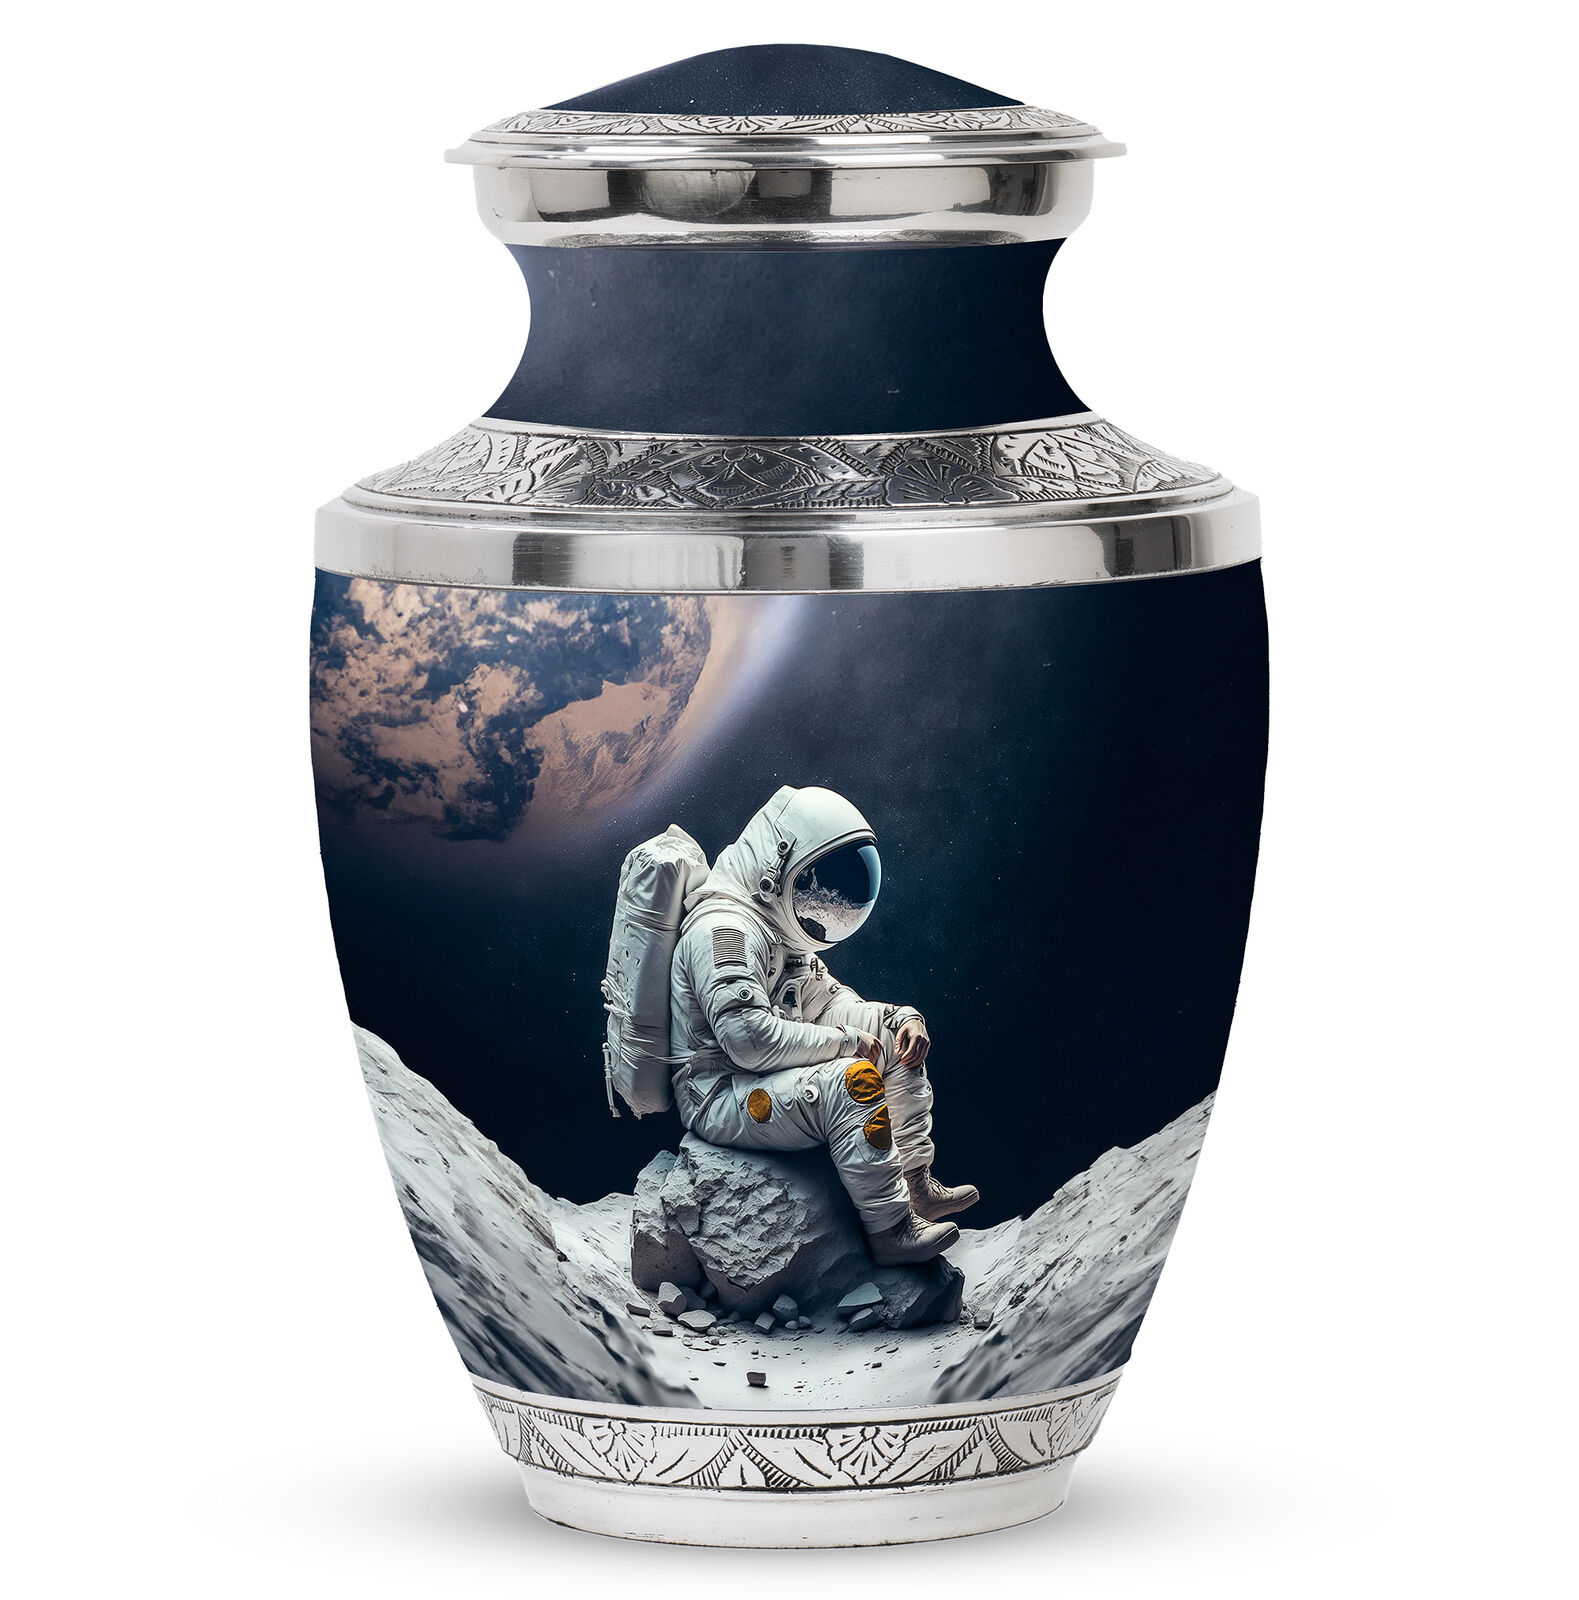 Urns For Infant Ashes Astronaut Suit Sitting Cracked Stone (10 Inch) Large Urn